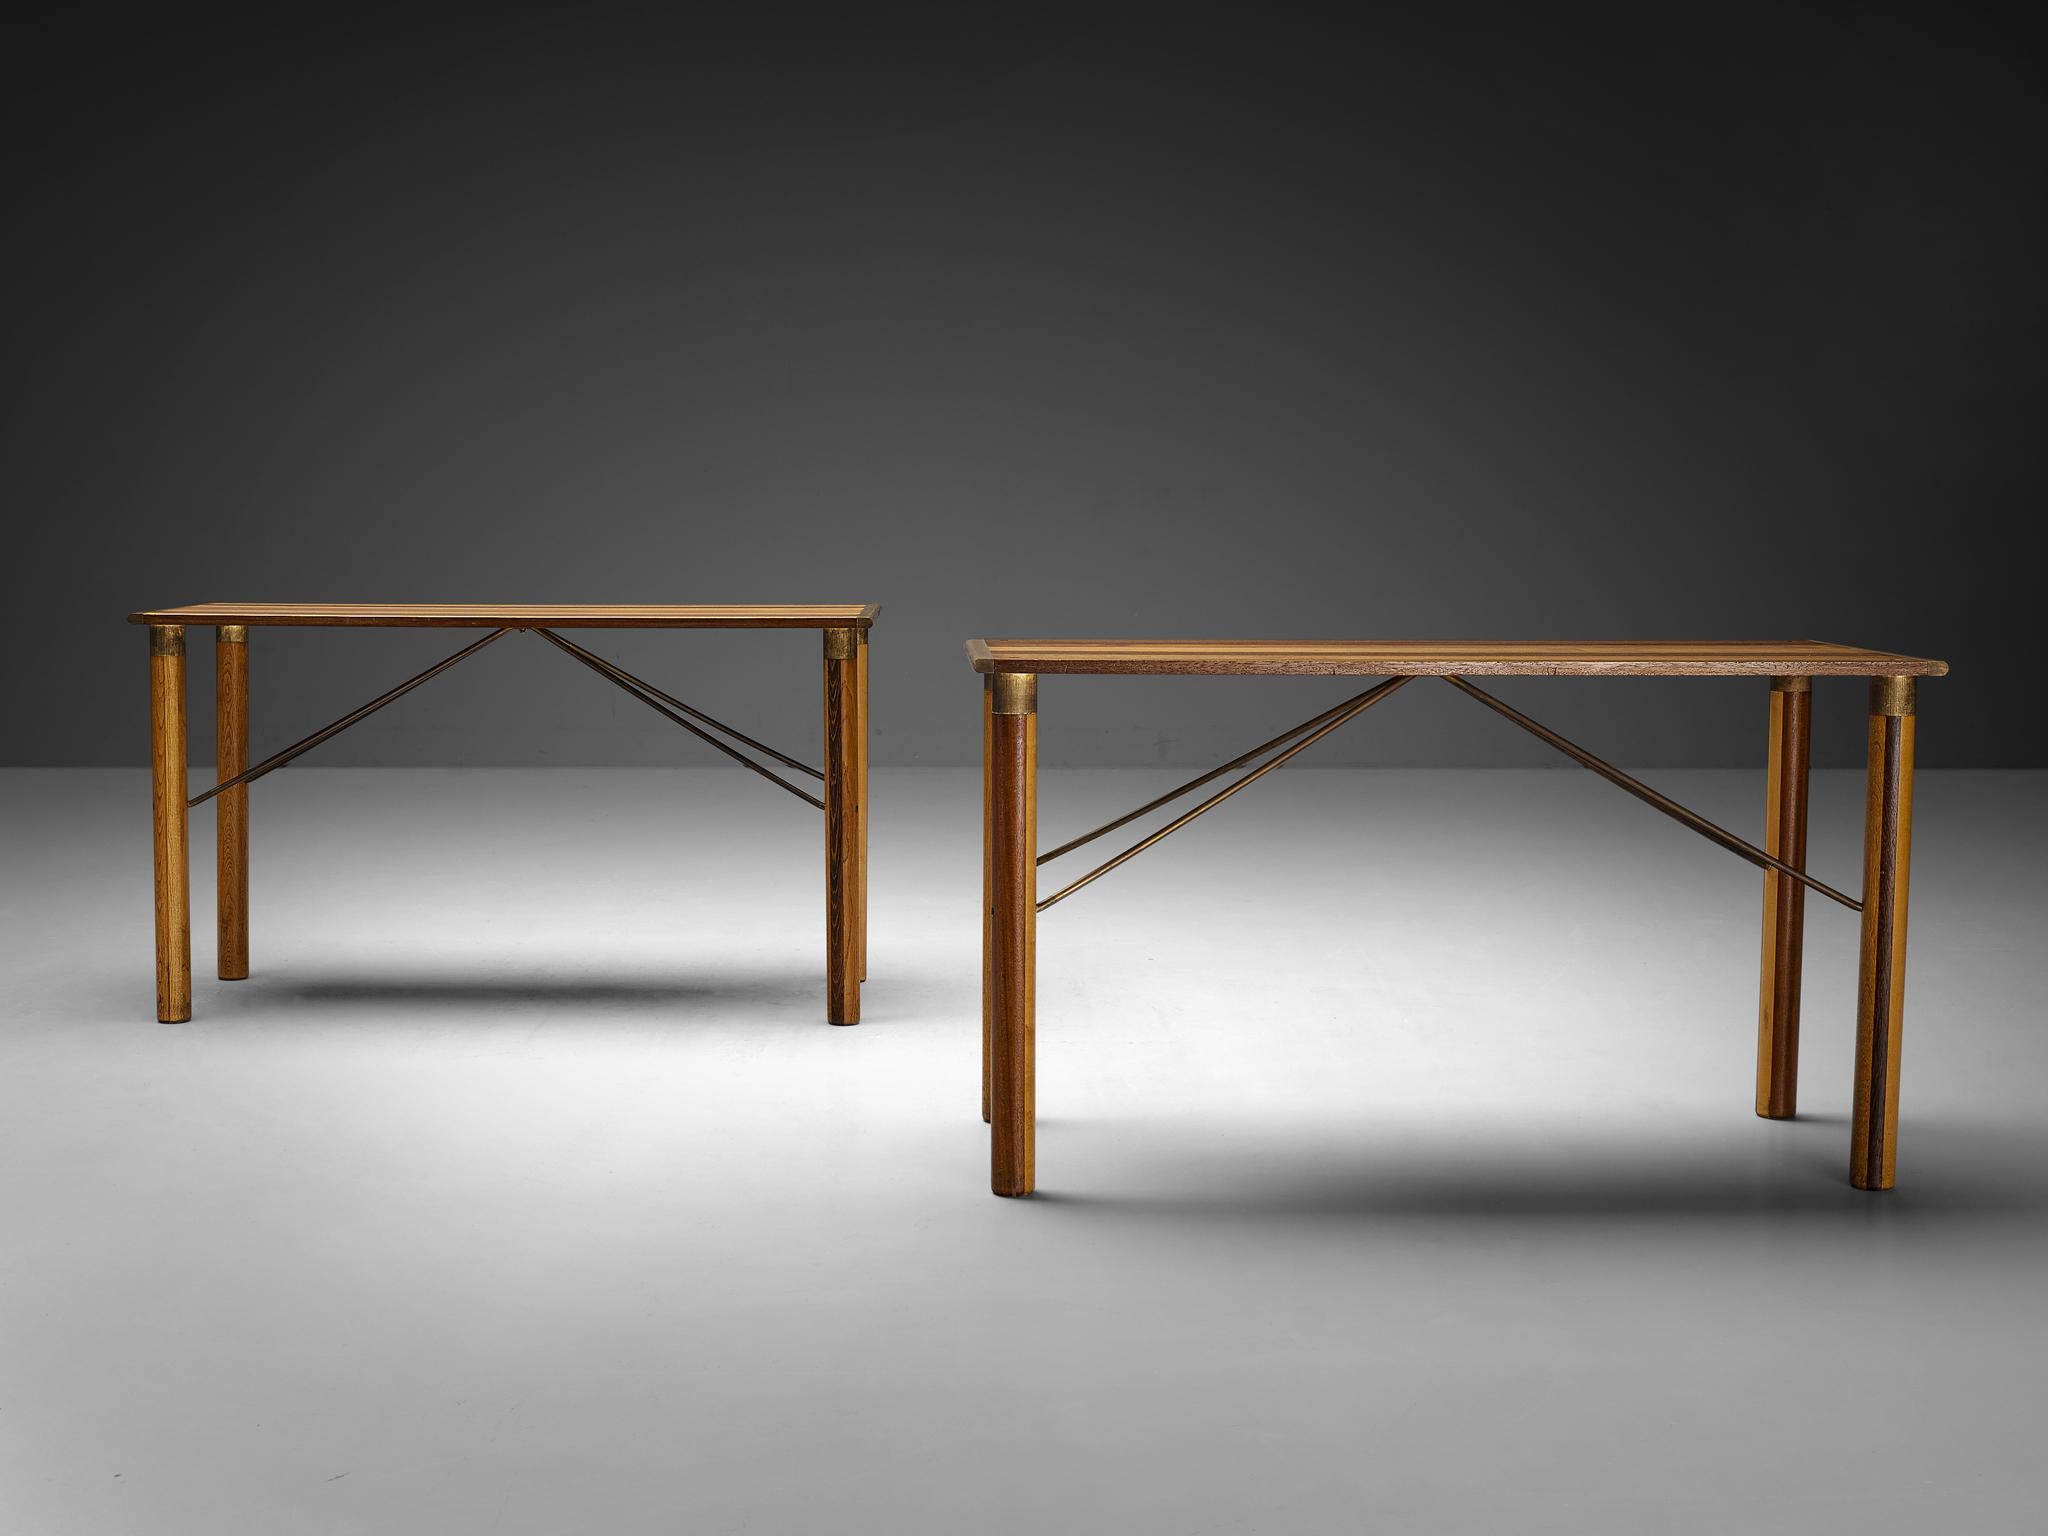 Afra & Tobia Scarpa 'Benetton' Consoles in Mixed Wood and Brass  For Sale 4